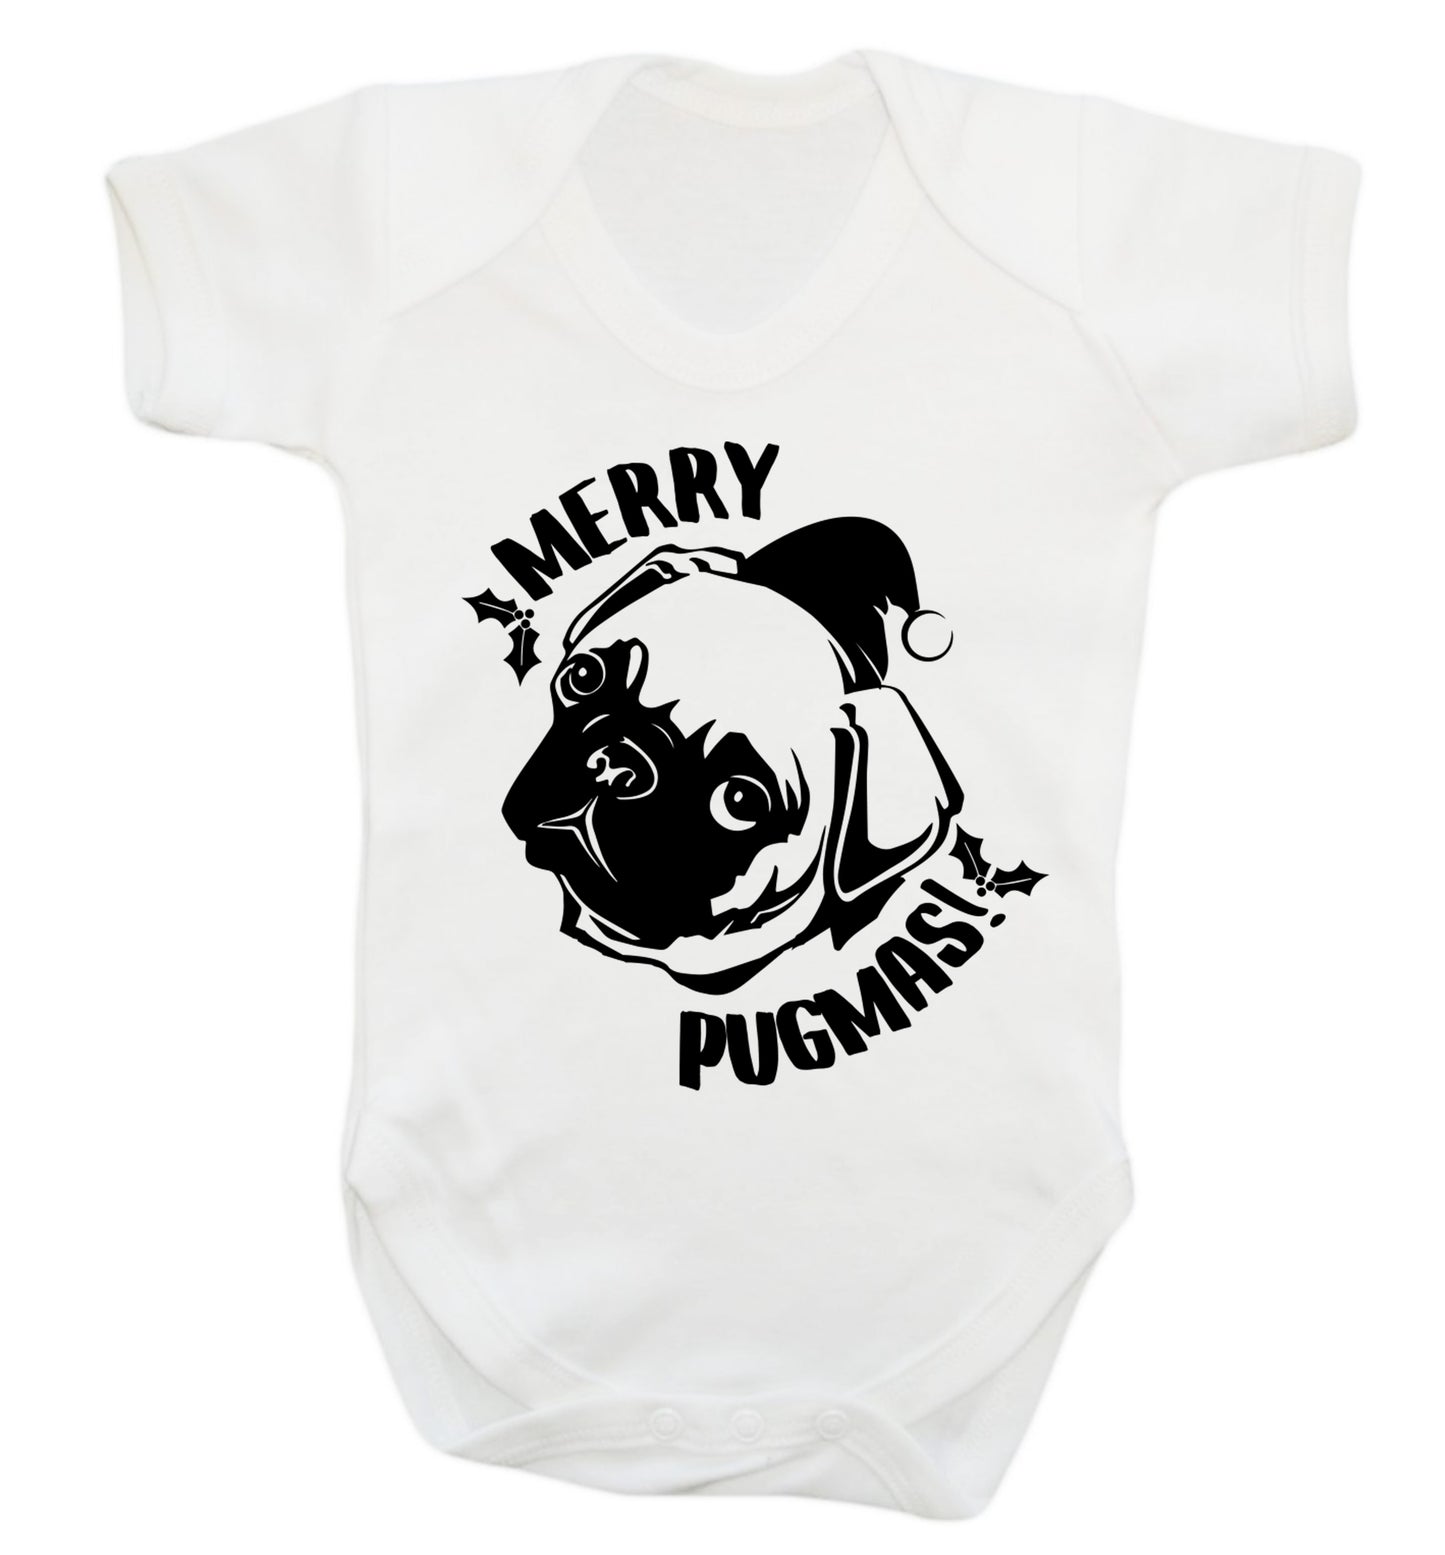 Merry Pugmas Baby Vest white 18-24 months